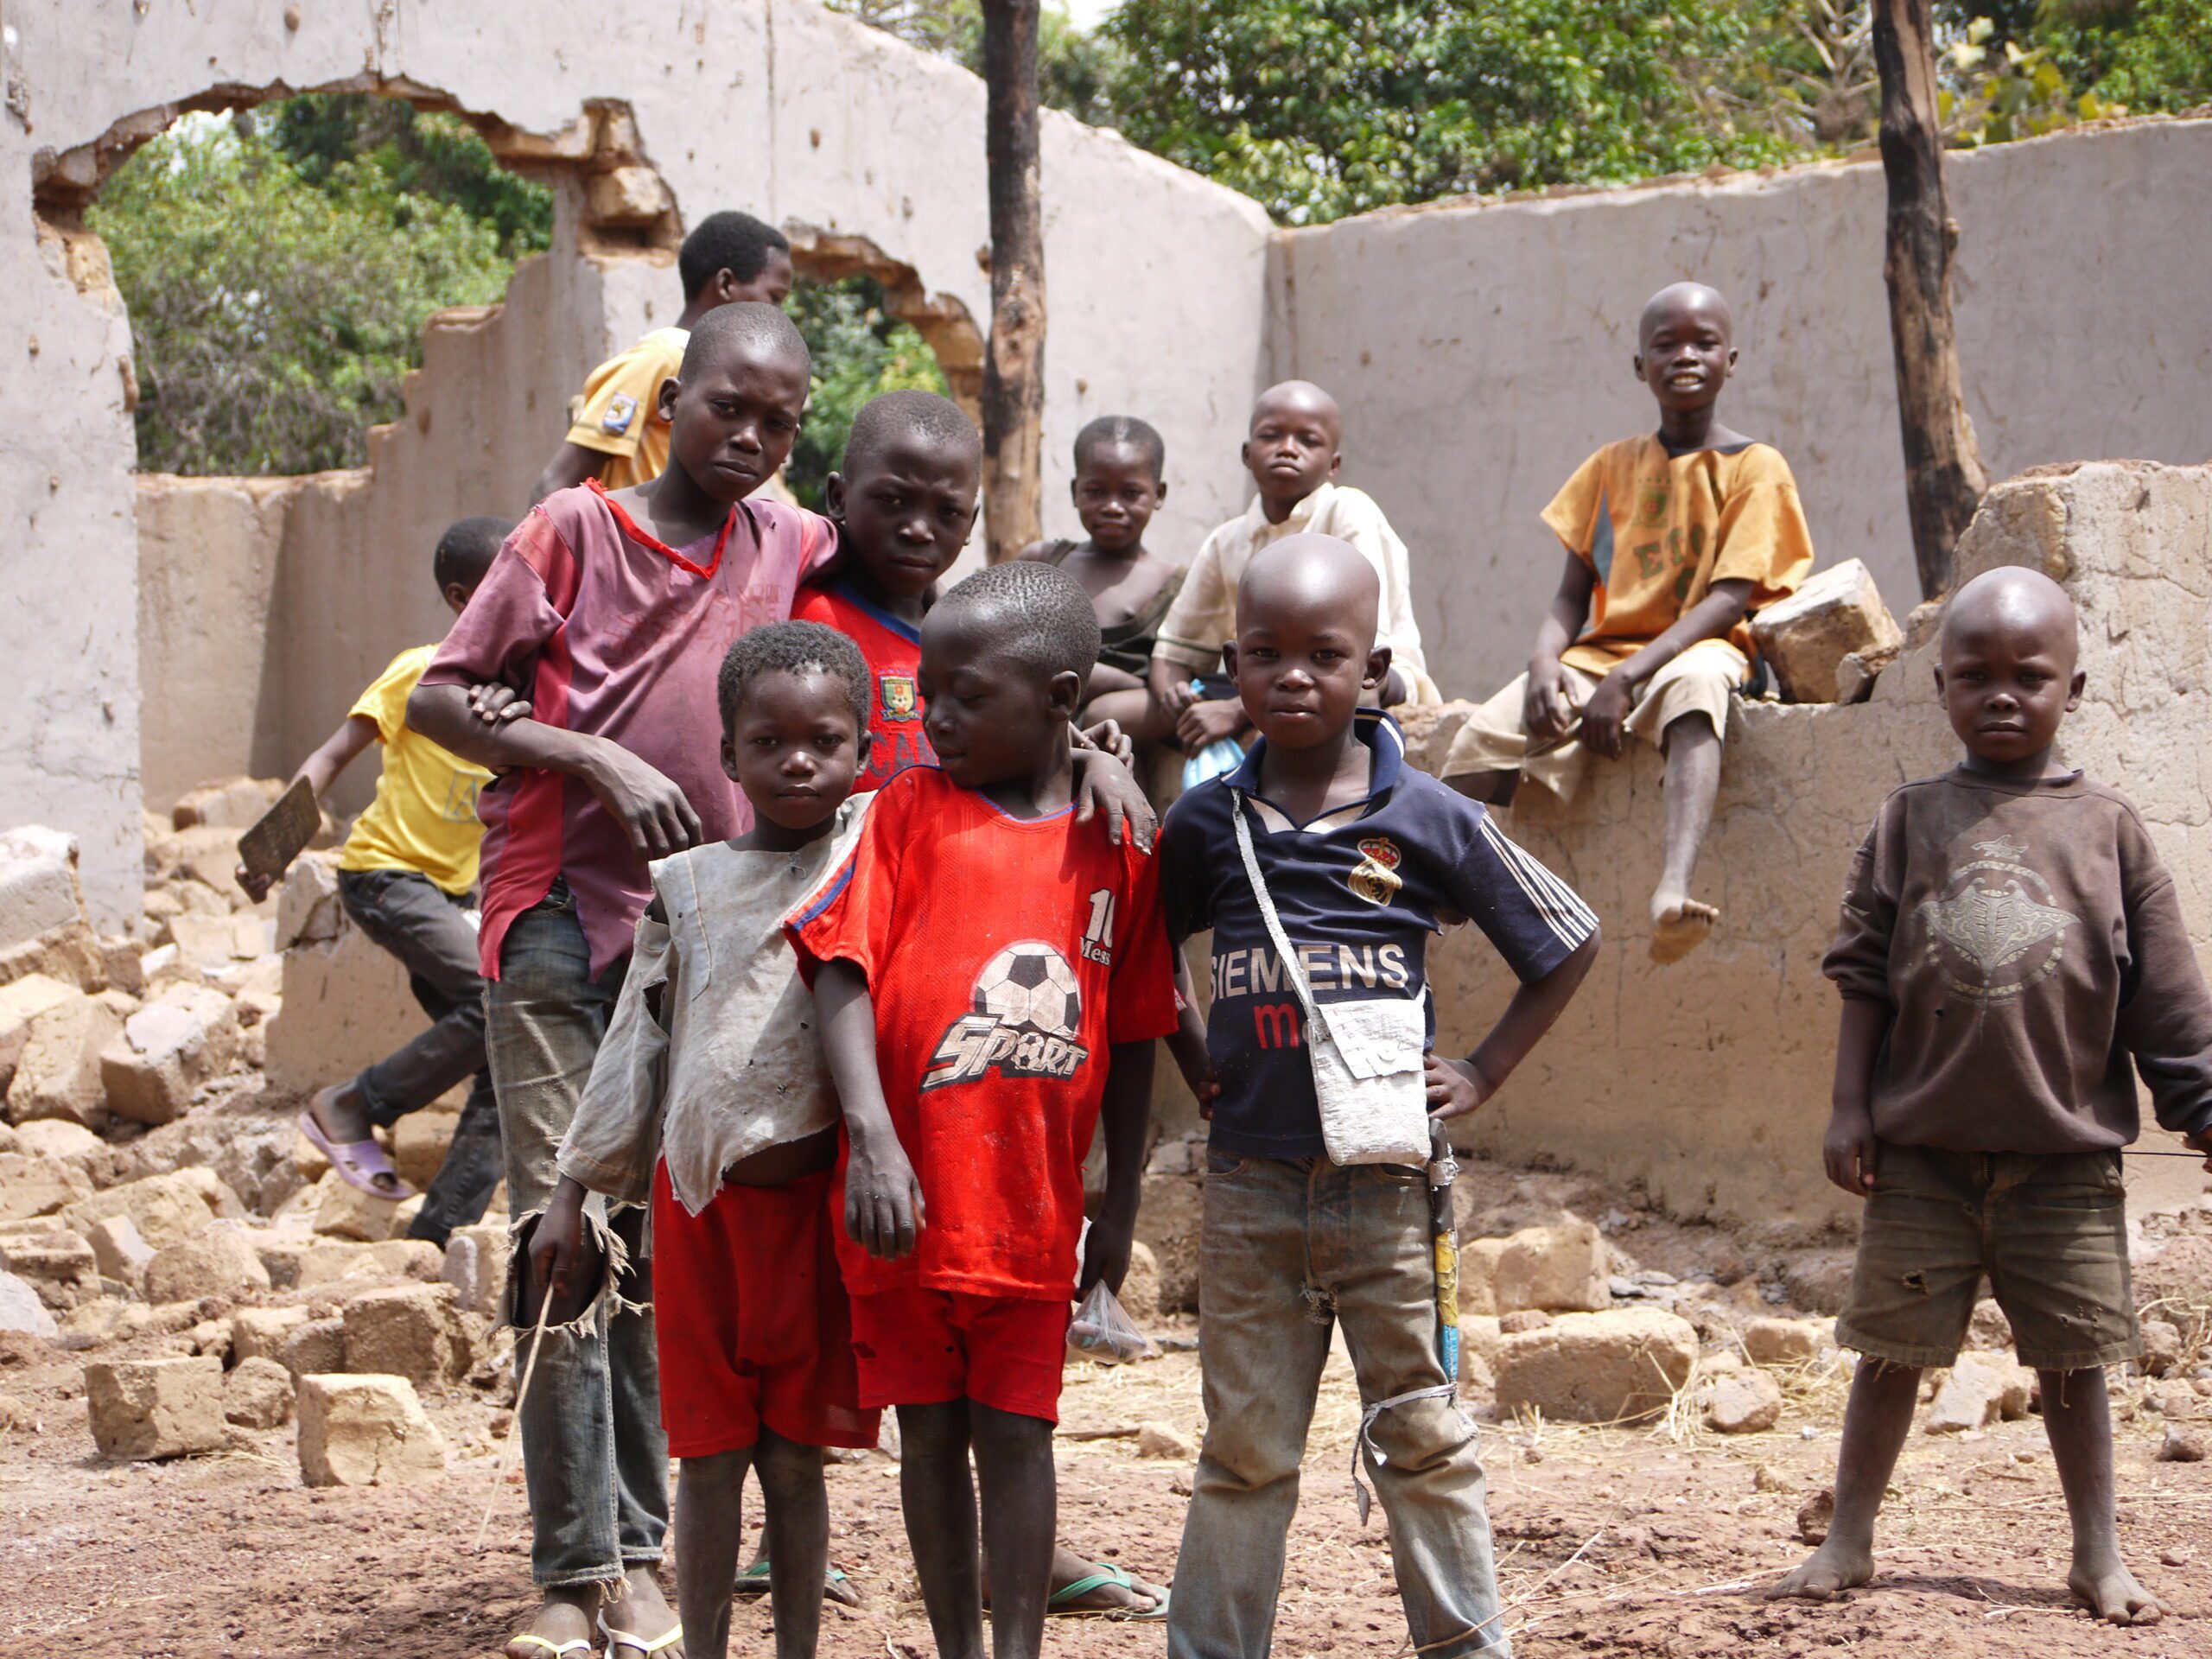  The children of Zere, Central African republic